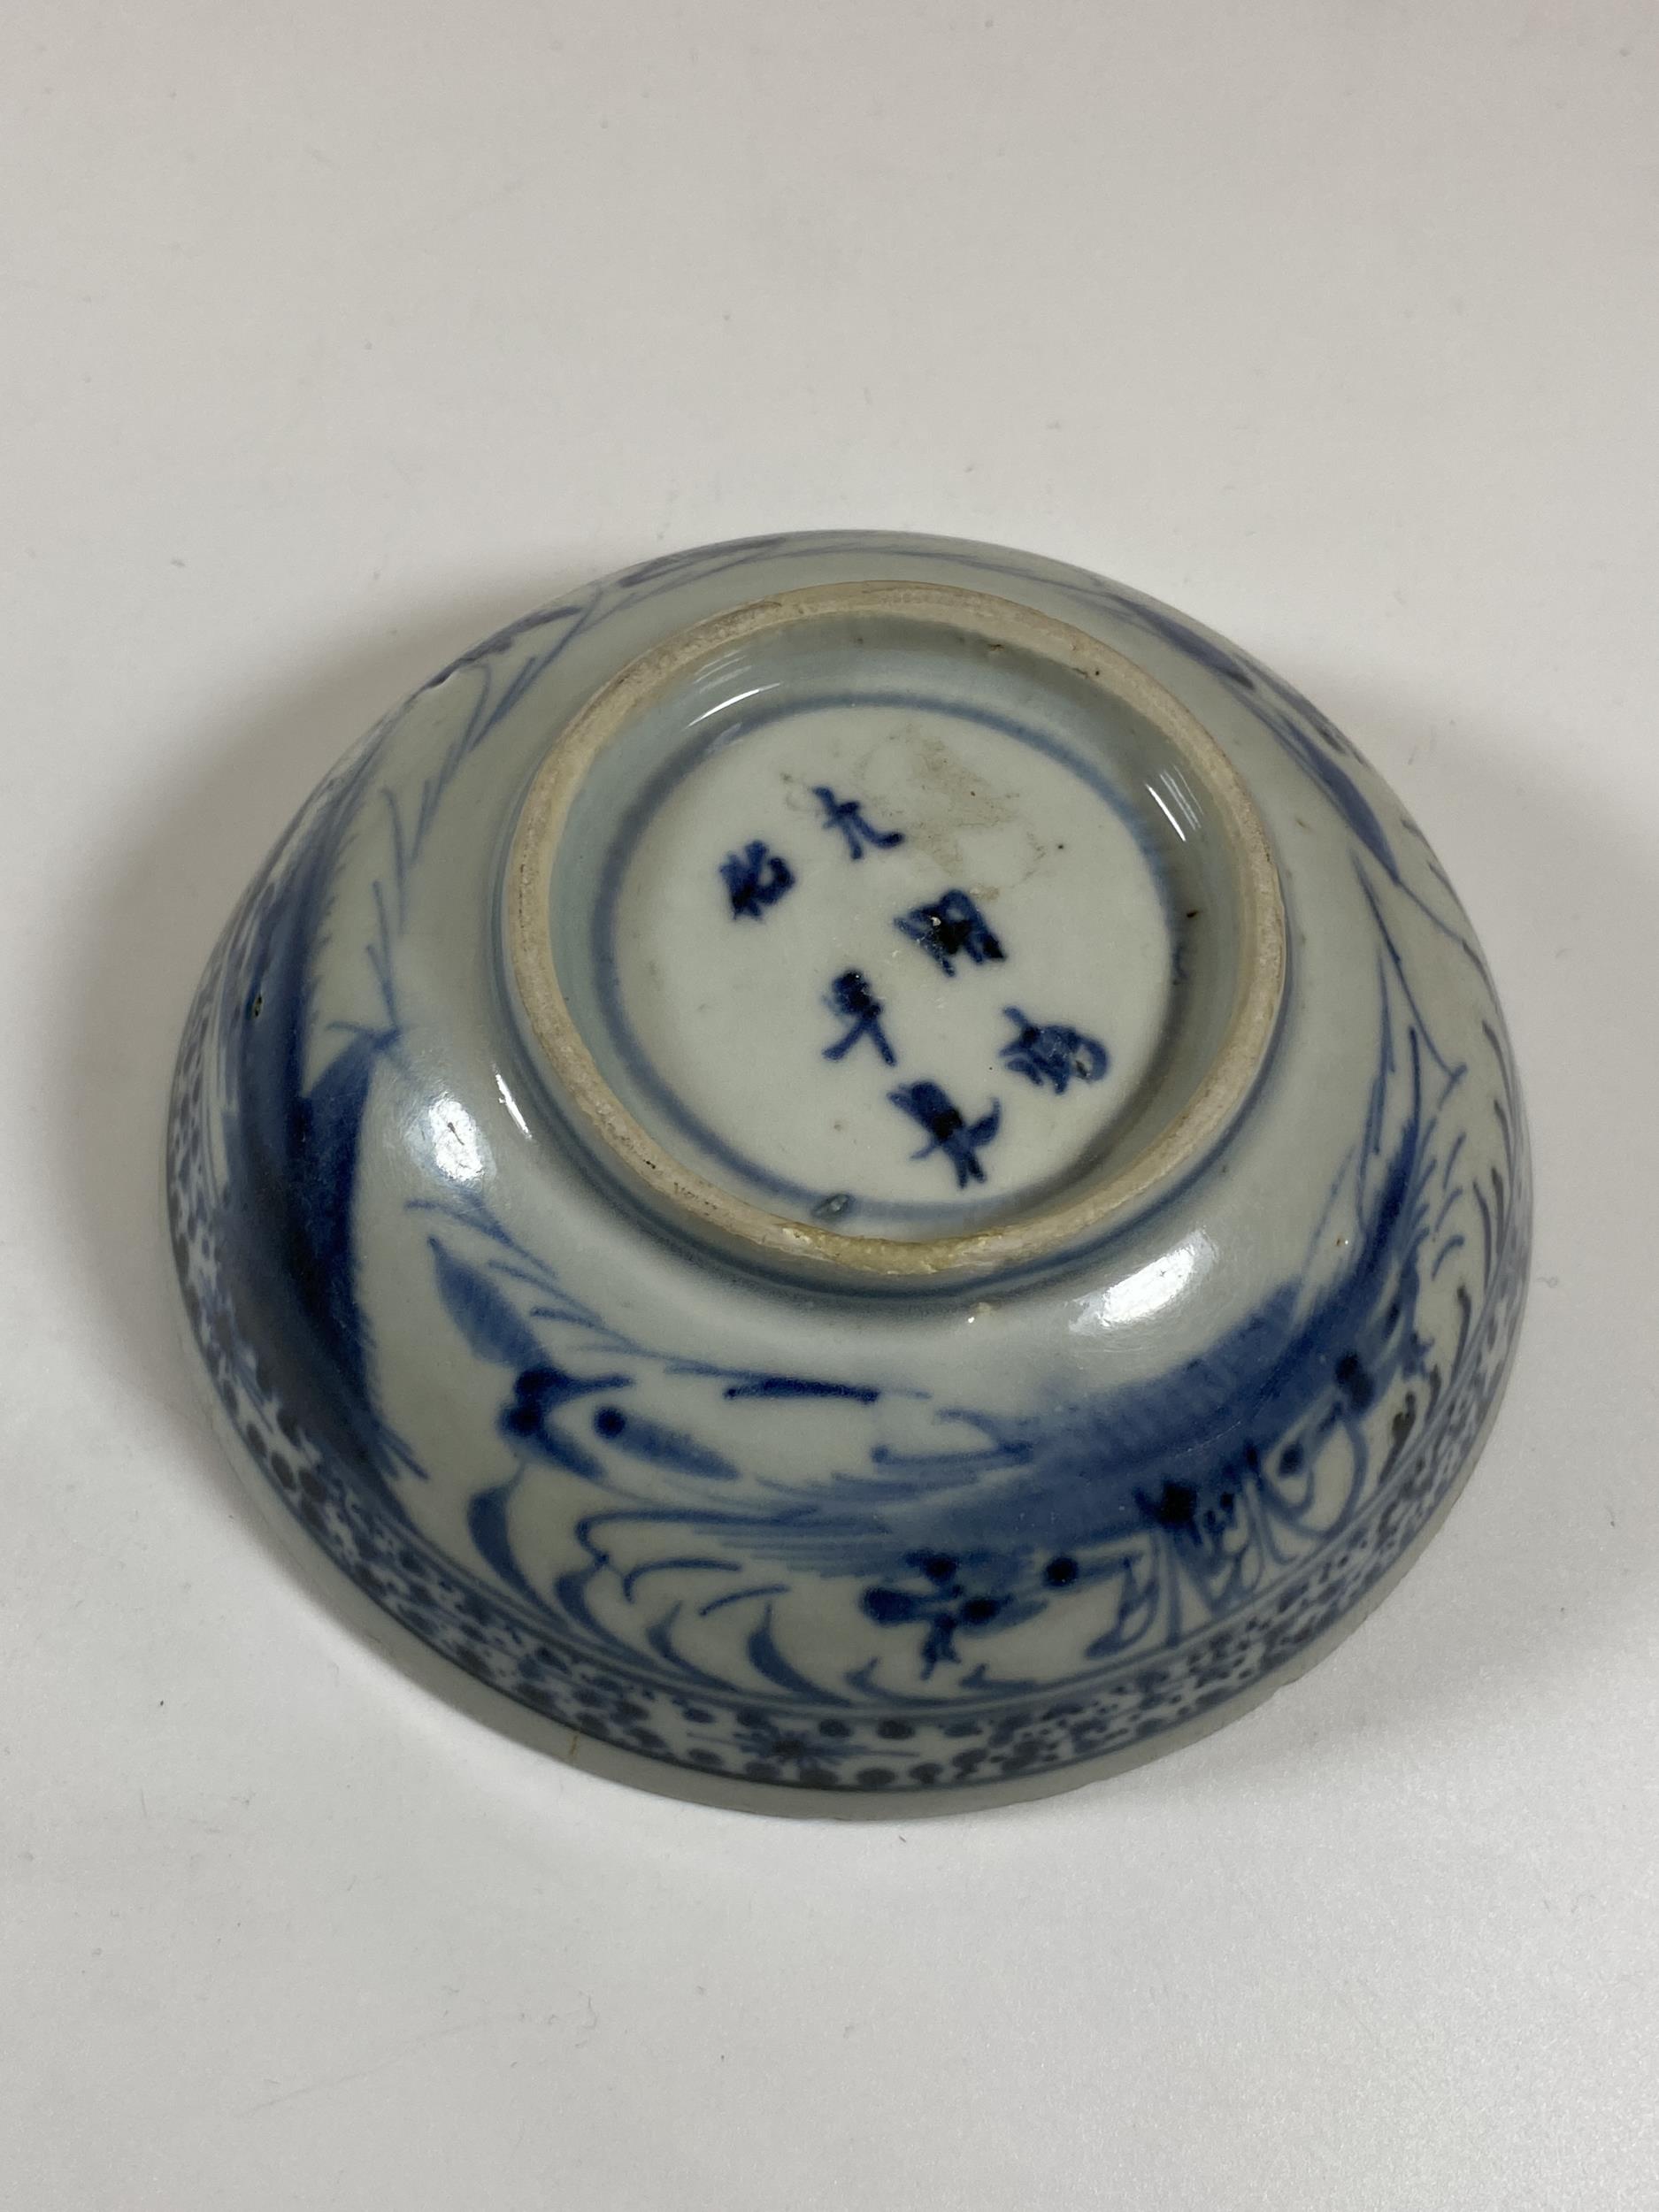 A BELIEVED MING DYNASTY CHINESE BLUE AND WHITE PORCELAIN BOWL, SIX CHARACTER MARK TO BASE DIAMETER - Image 4 of 6